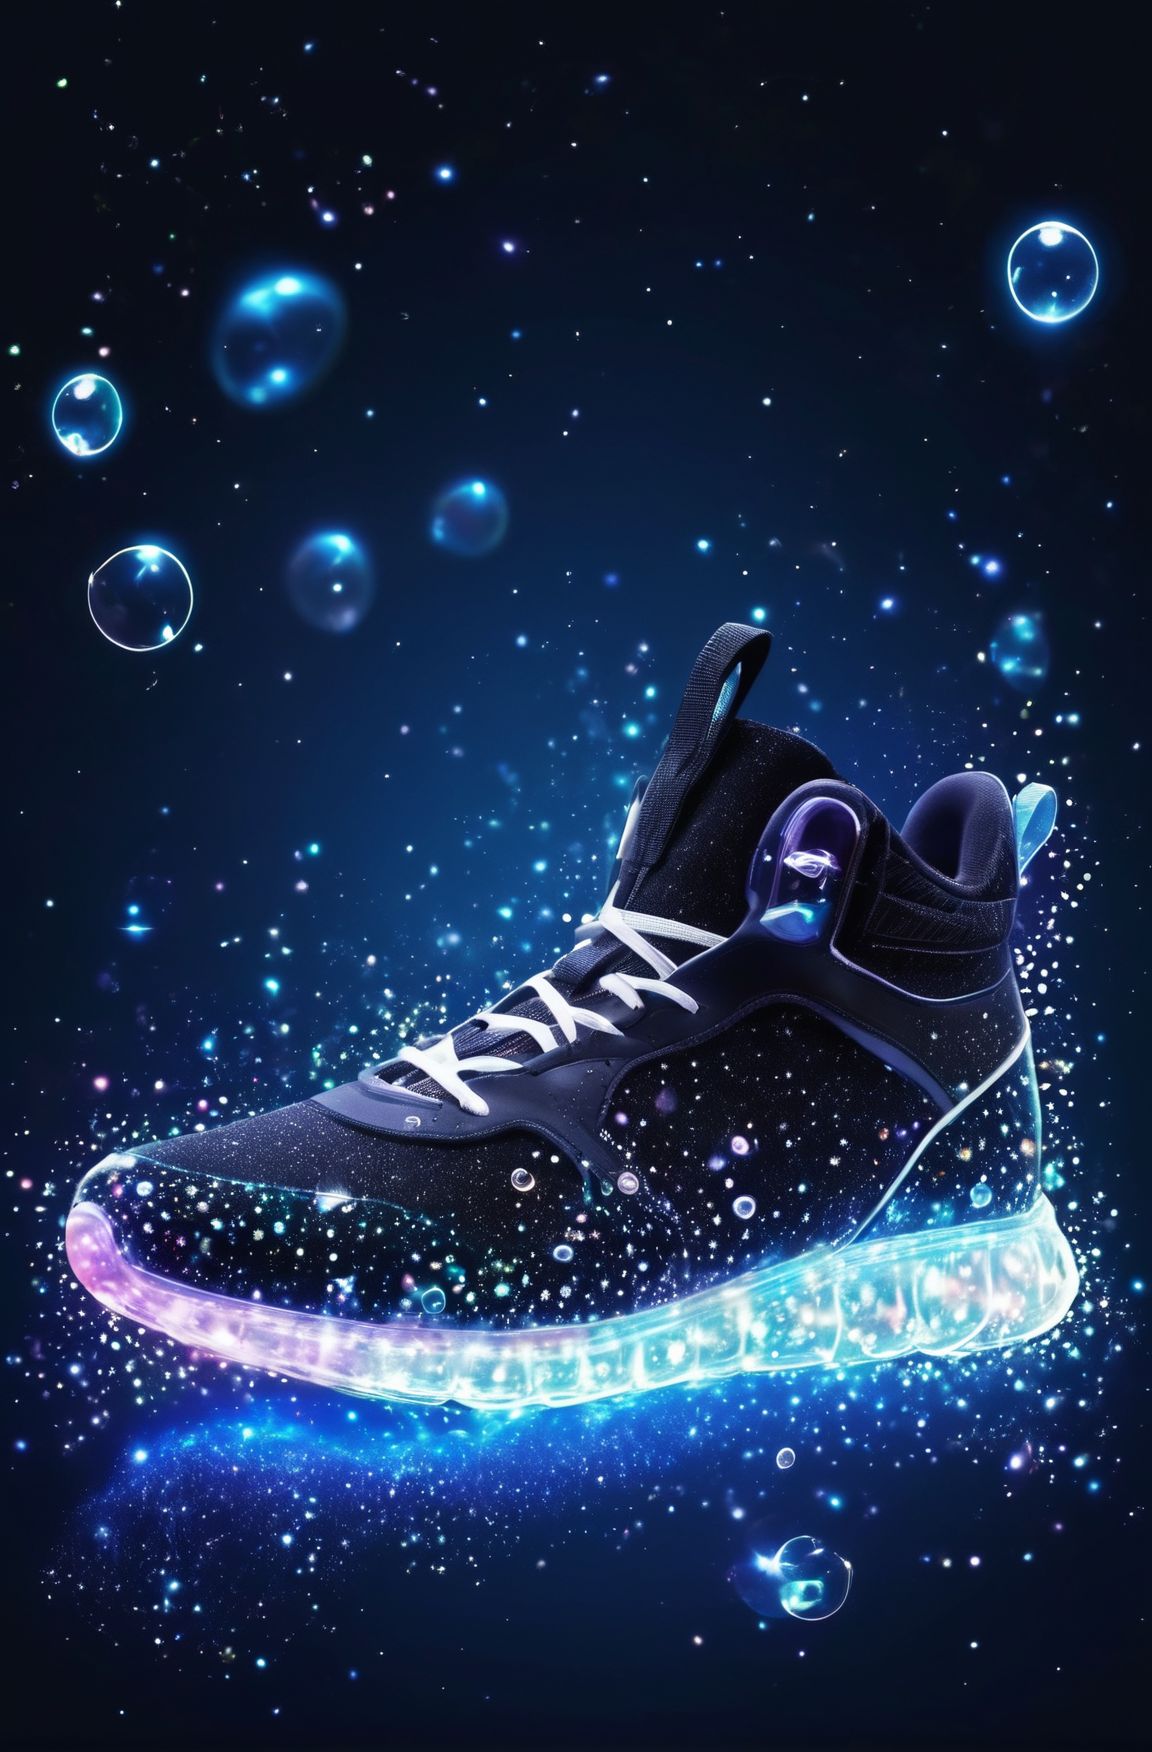 sneakers, bioluminescent, bright luminescence white light, made out of light beams, bubbles, particles, sparkles, glitch